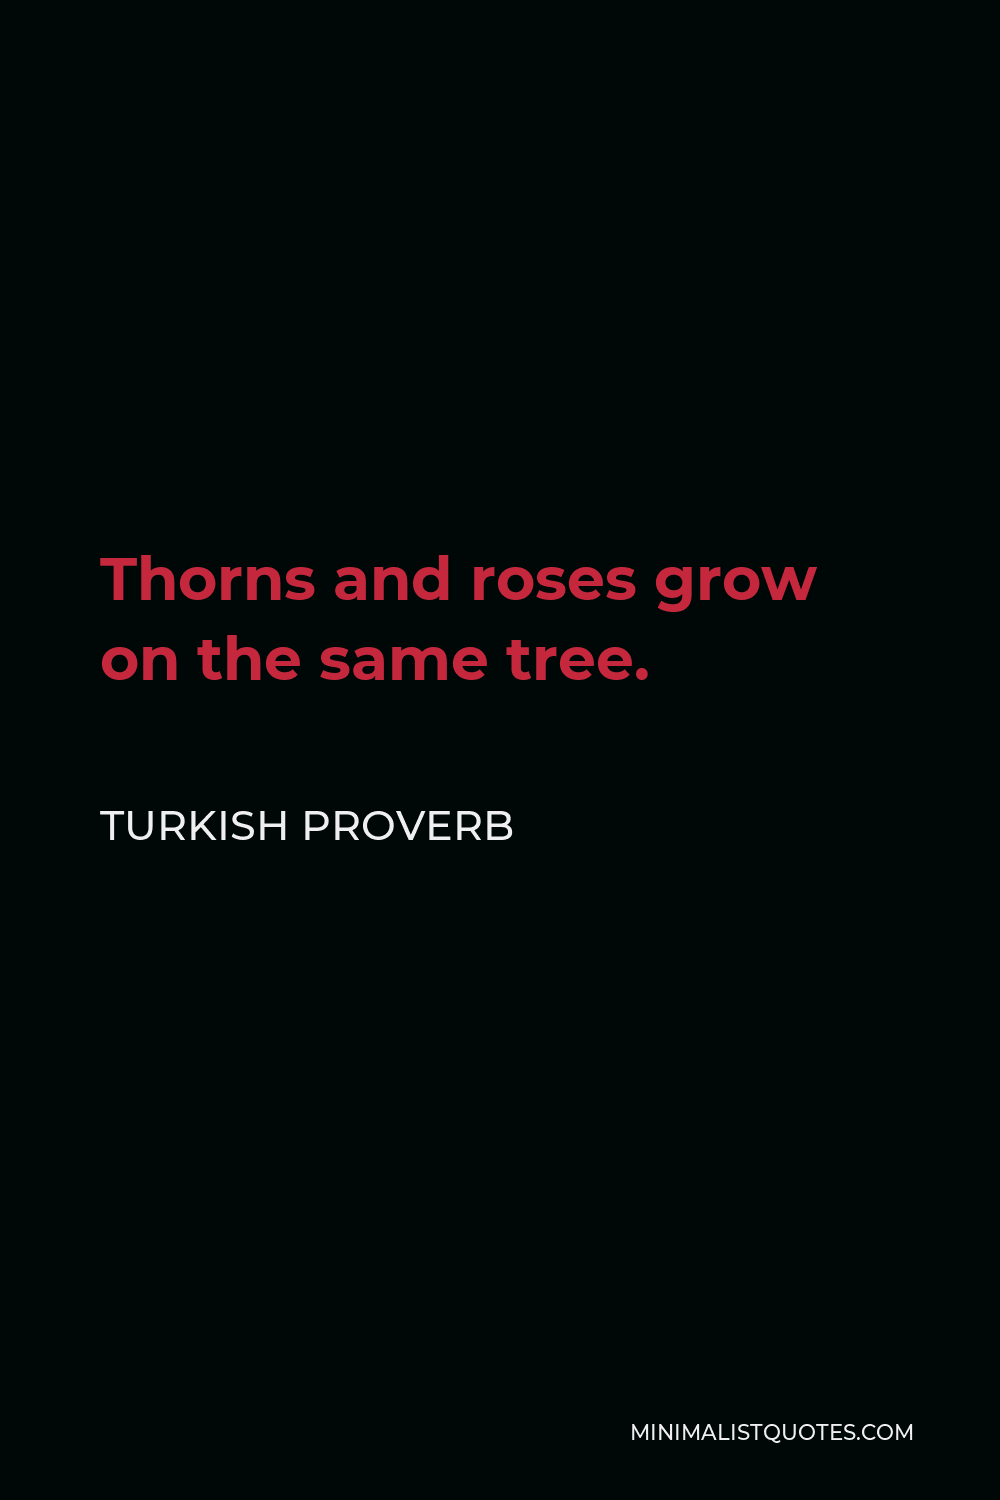 Turkish Proverb Quote - Thorns and roses grow on the same tree.